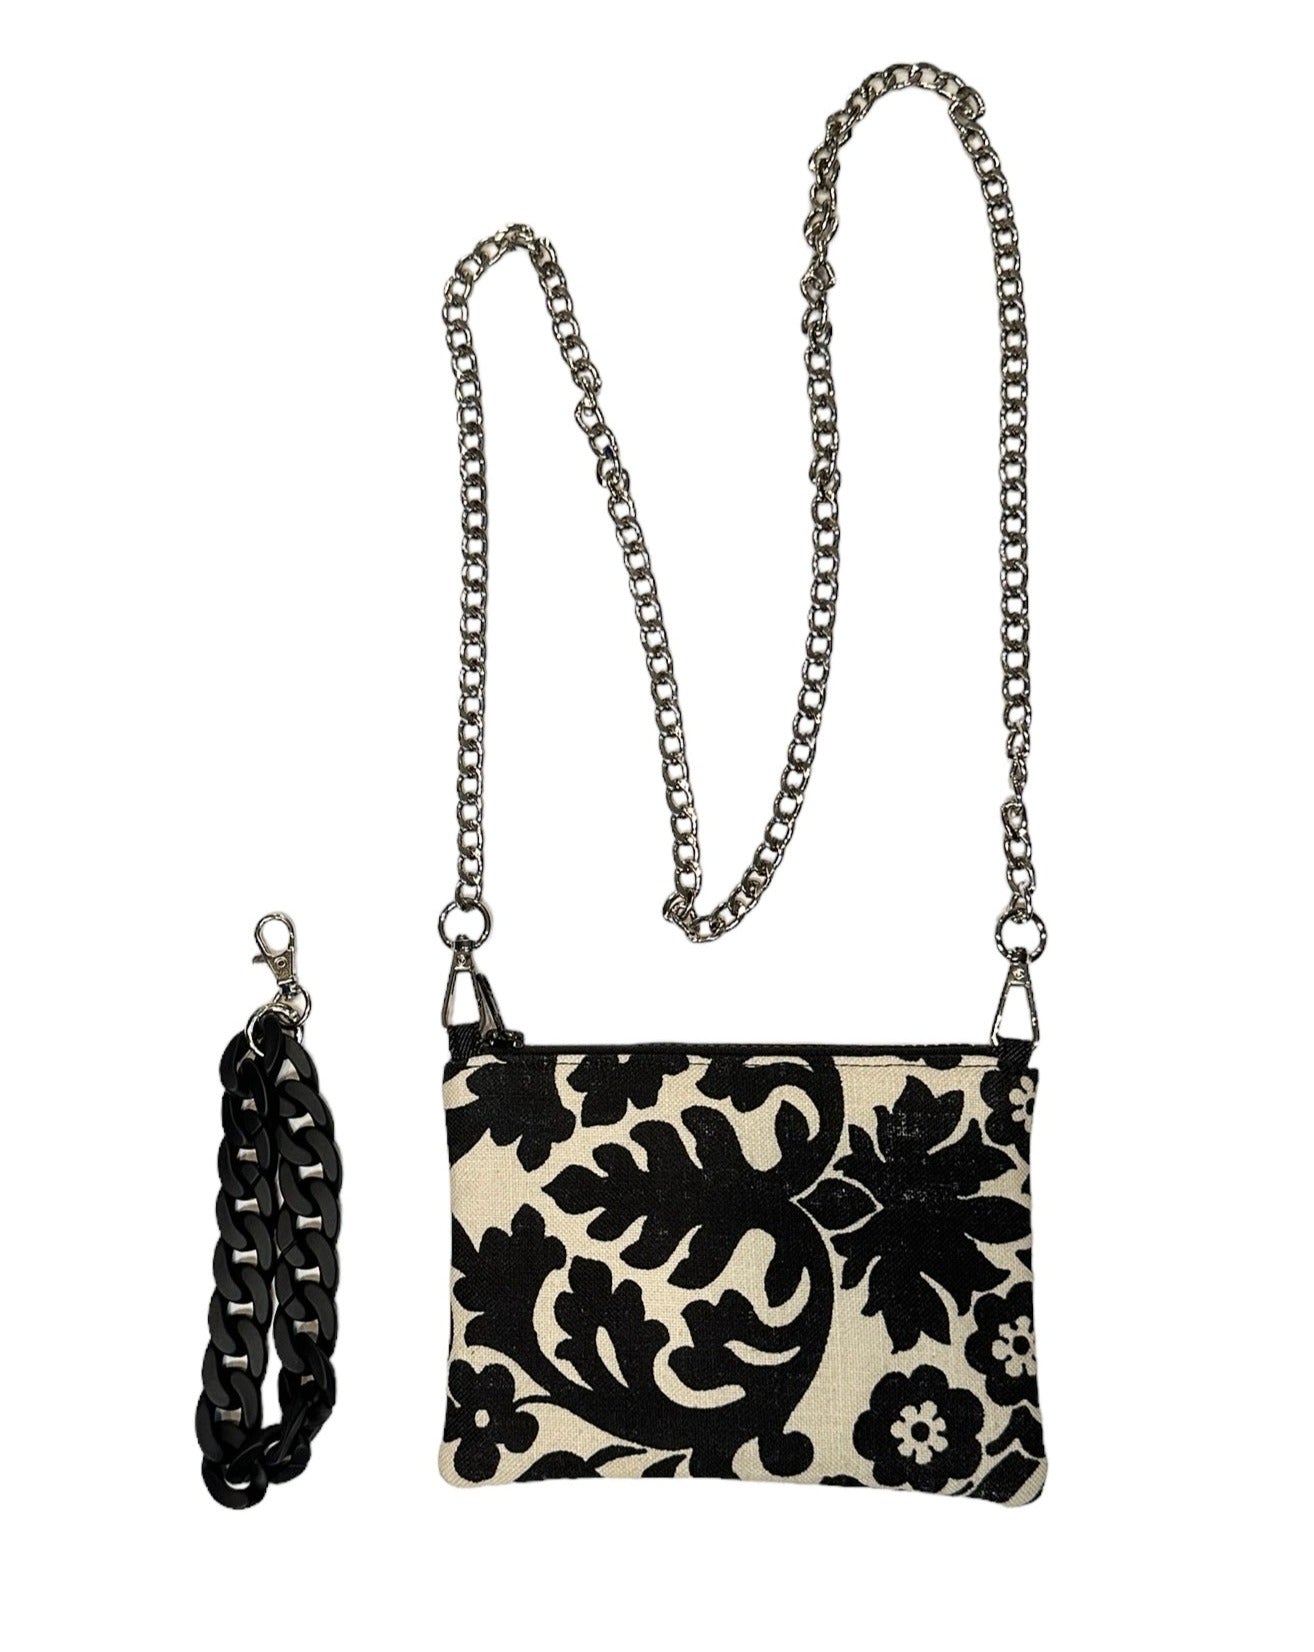 Cream Floral pouch with chain and wristlet. 